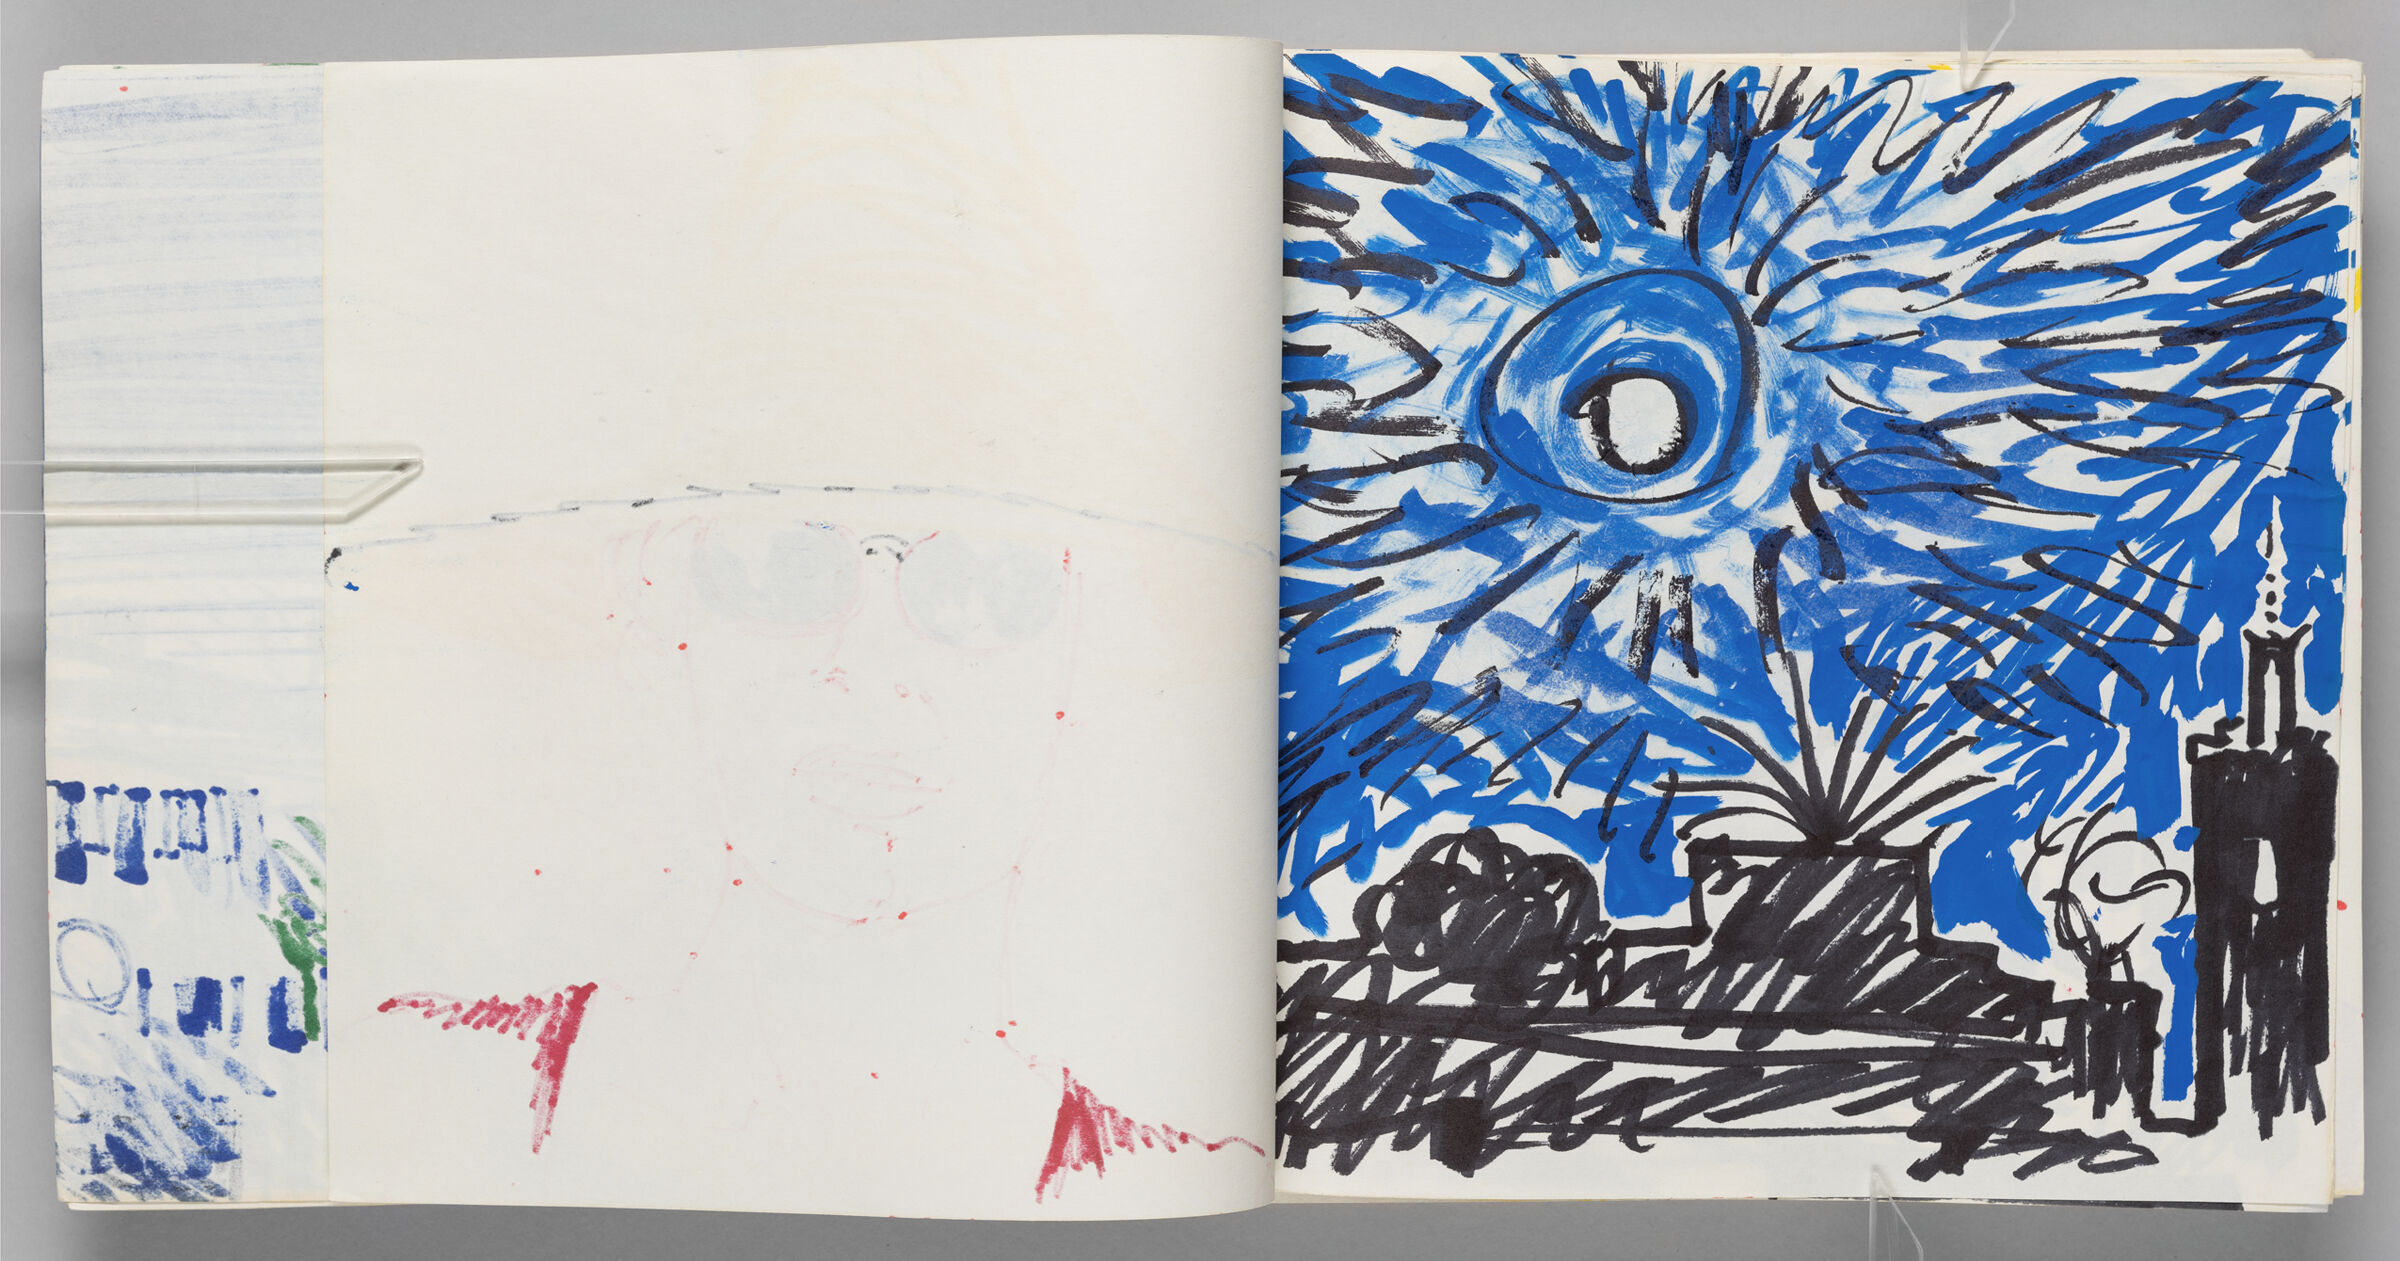 Untitled (Bleed-Through Of Previous Page, Left Page); Untitled (View Of Taroudant, Right Page)
